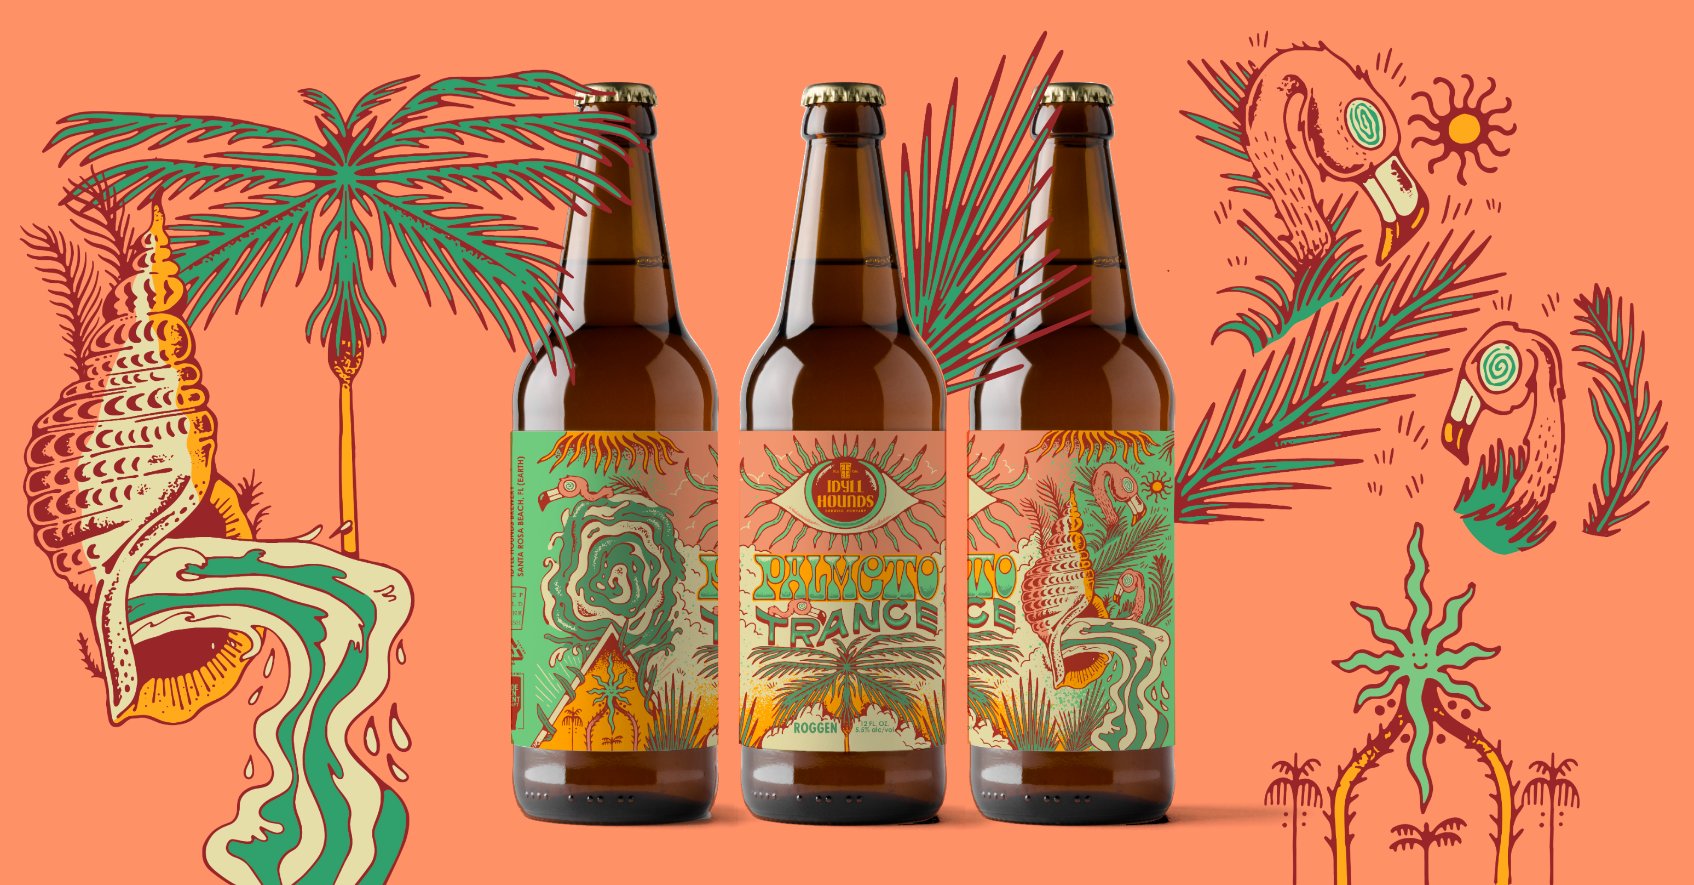 Idyll Hound’s Psychedelic Beer Label Captures the Trippiness of Being in the Sun All Day